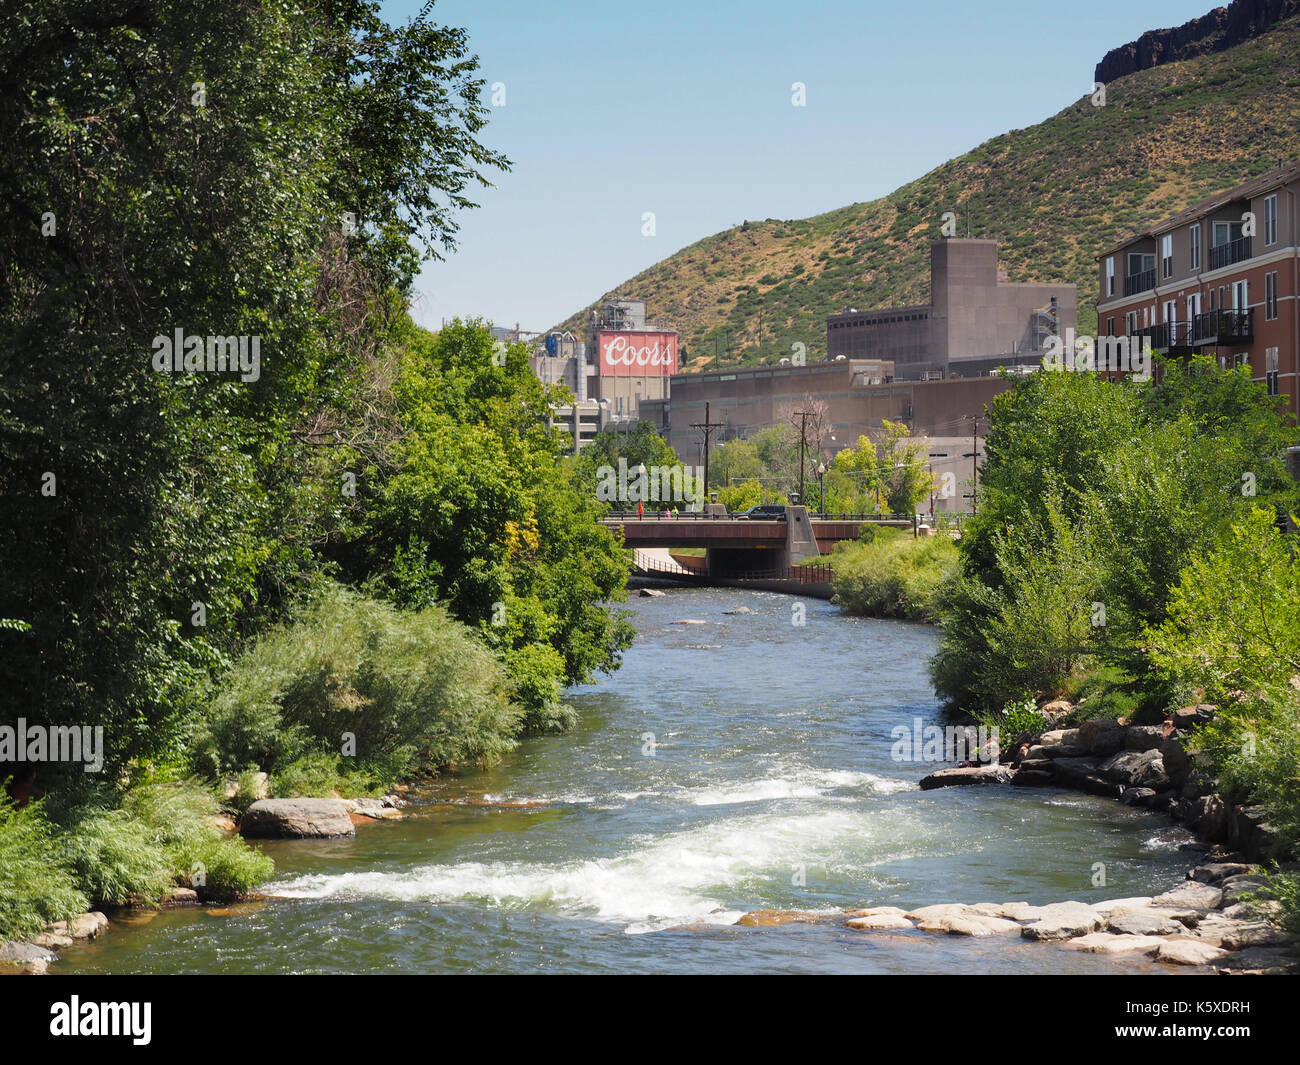 Golden, CO - August 12:  The Coors brewery in Golden, Colorado, that is the largest single brewery facility in the world.   The Clear Creek runs throu Stock Photo